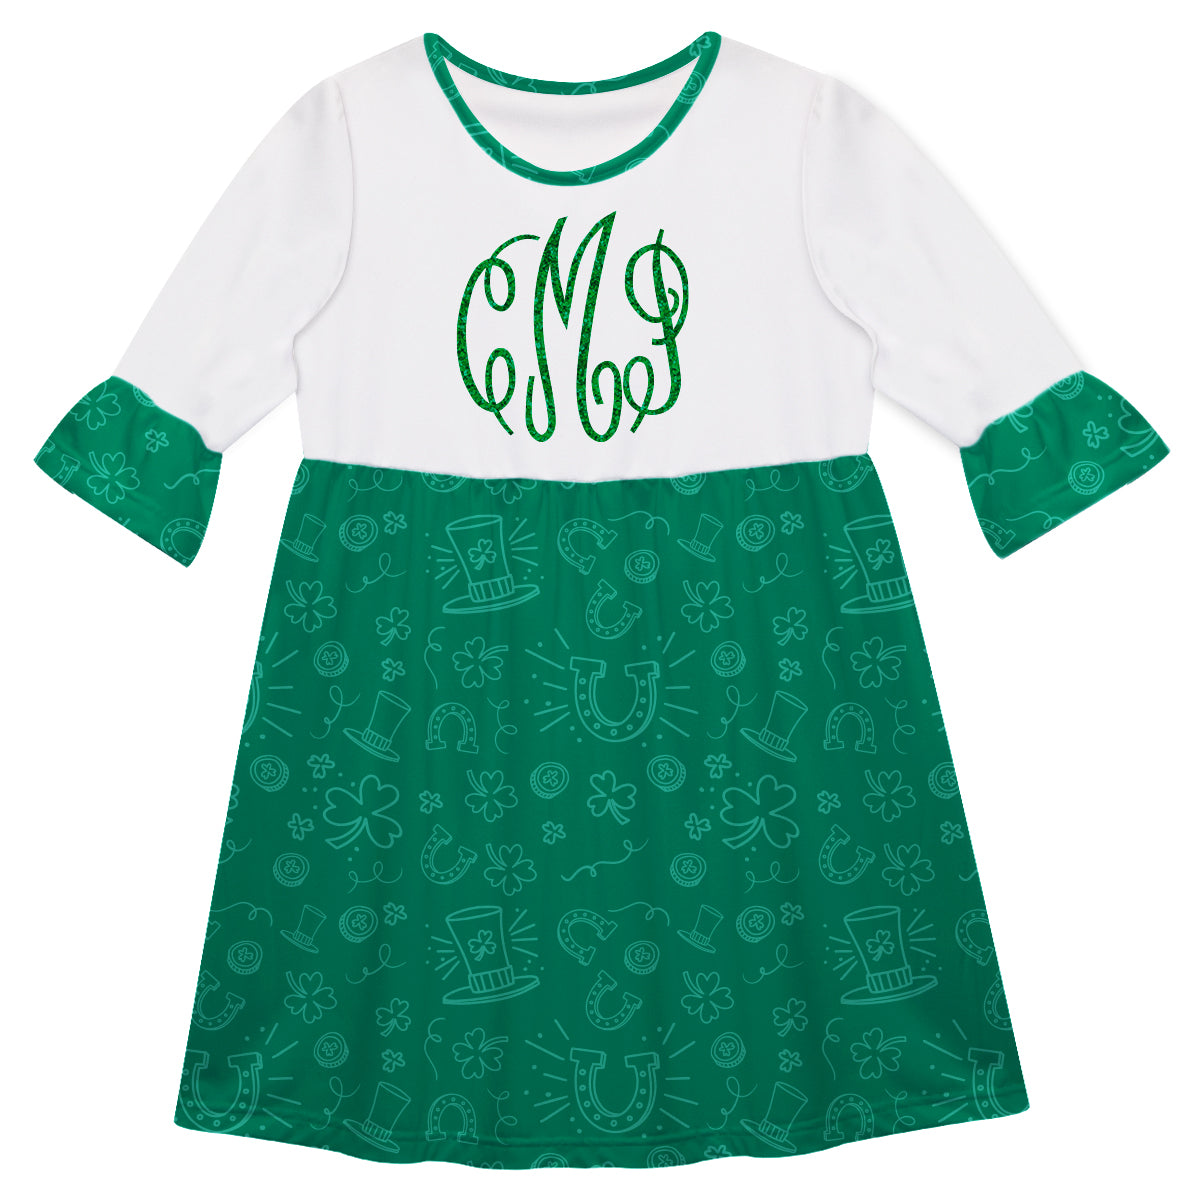 St Patricks Personalized Monogram Green and White Amy Dress 3/4 Sleeve - Wimziy&Co.